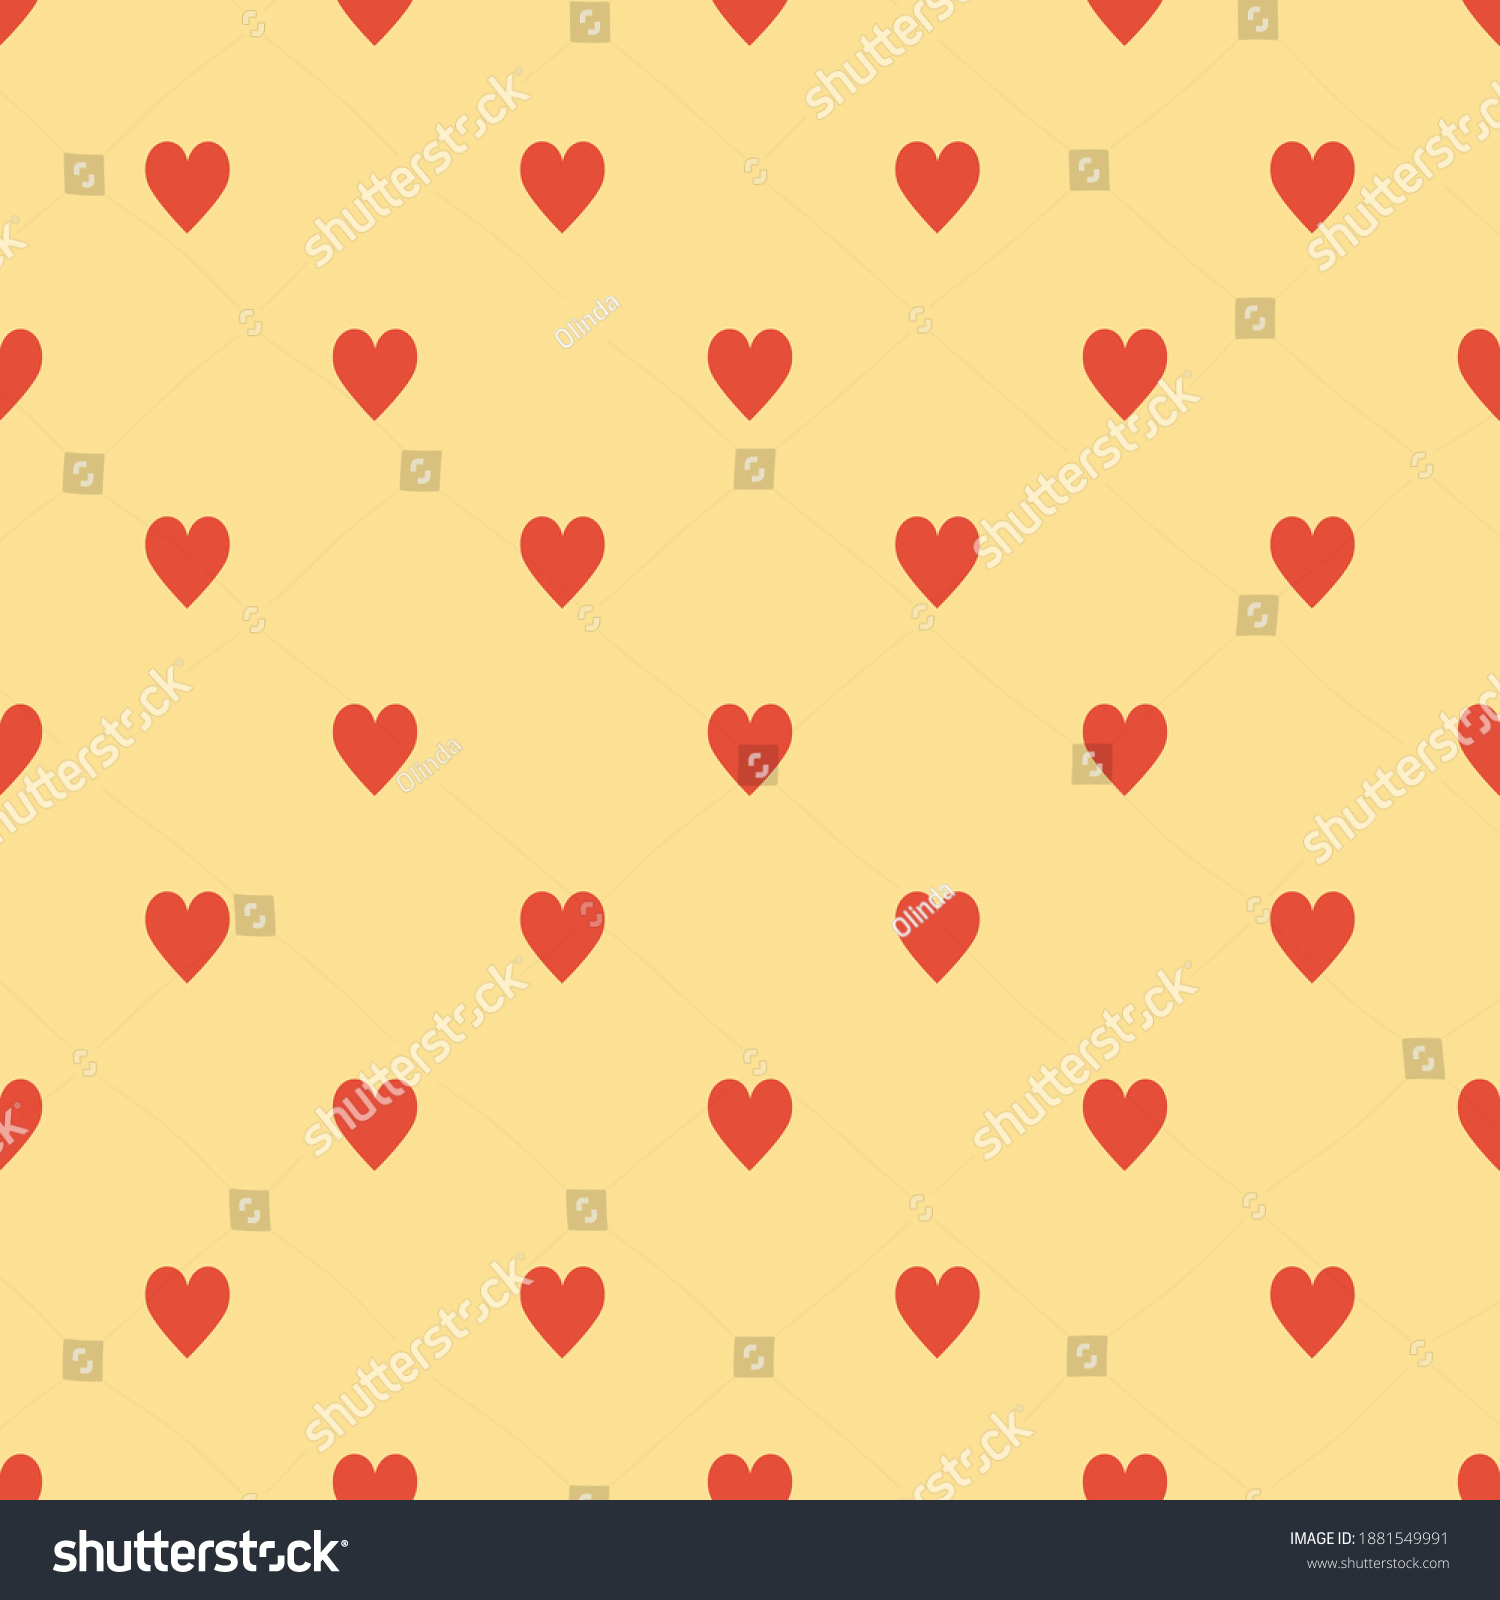 SVG of Seamless pattern red hearts on vintage yellow background. Elegant print for fabric textile gift paper scrapbook wallpaper kids clothes nursery decor svg